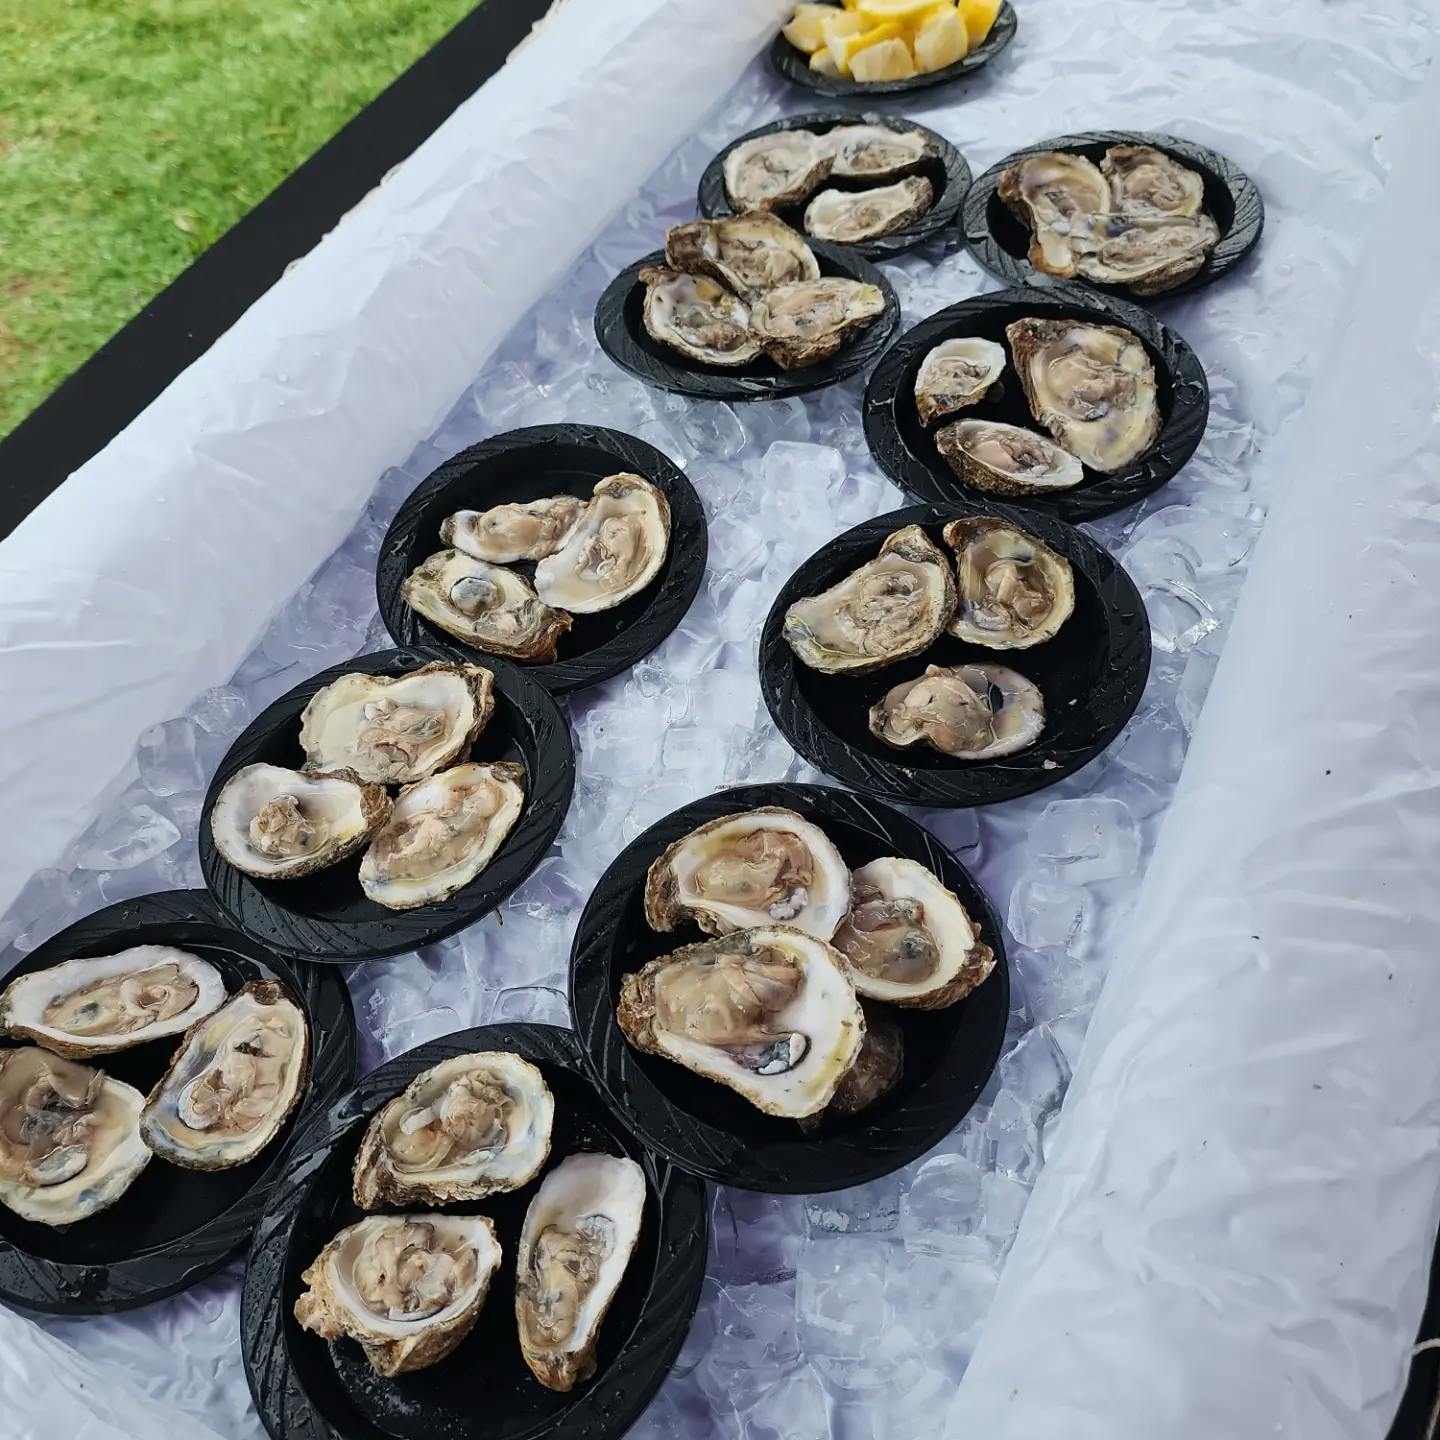 Oyster display